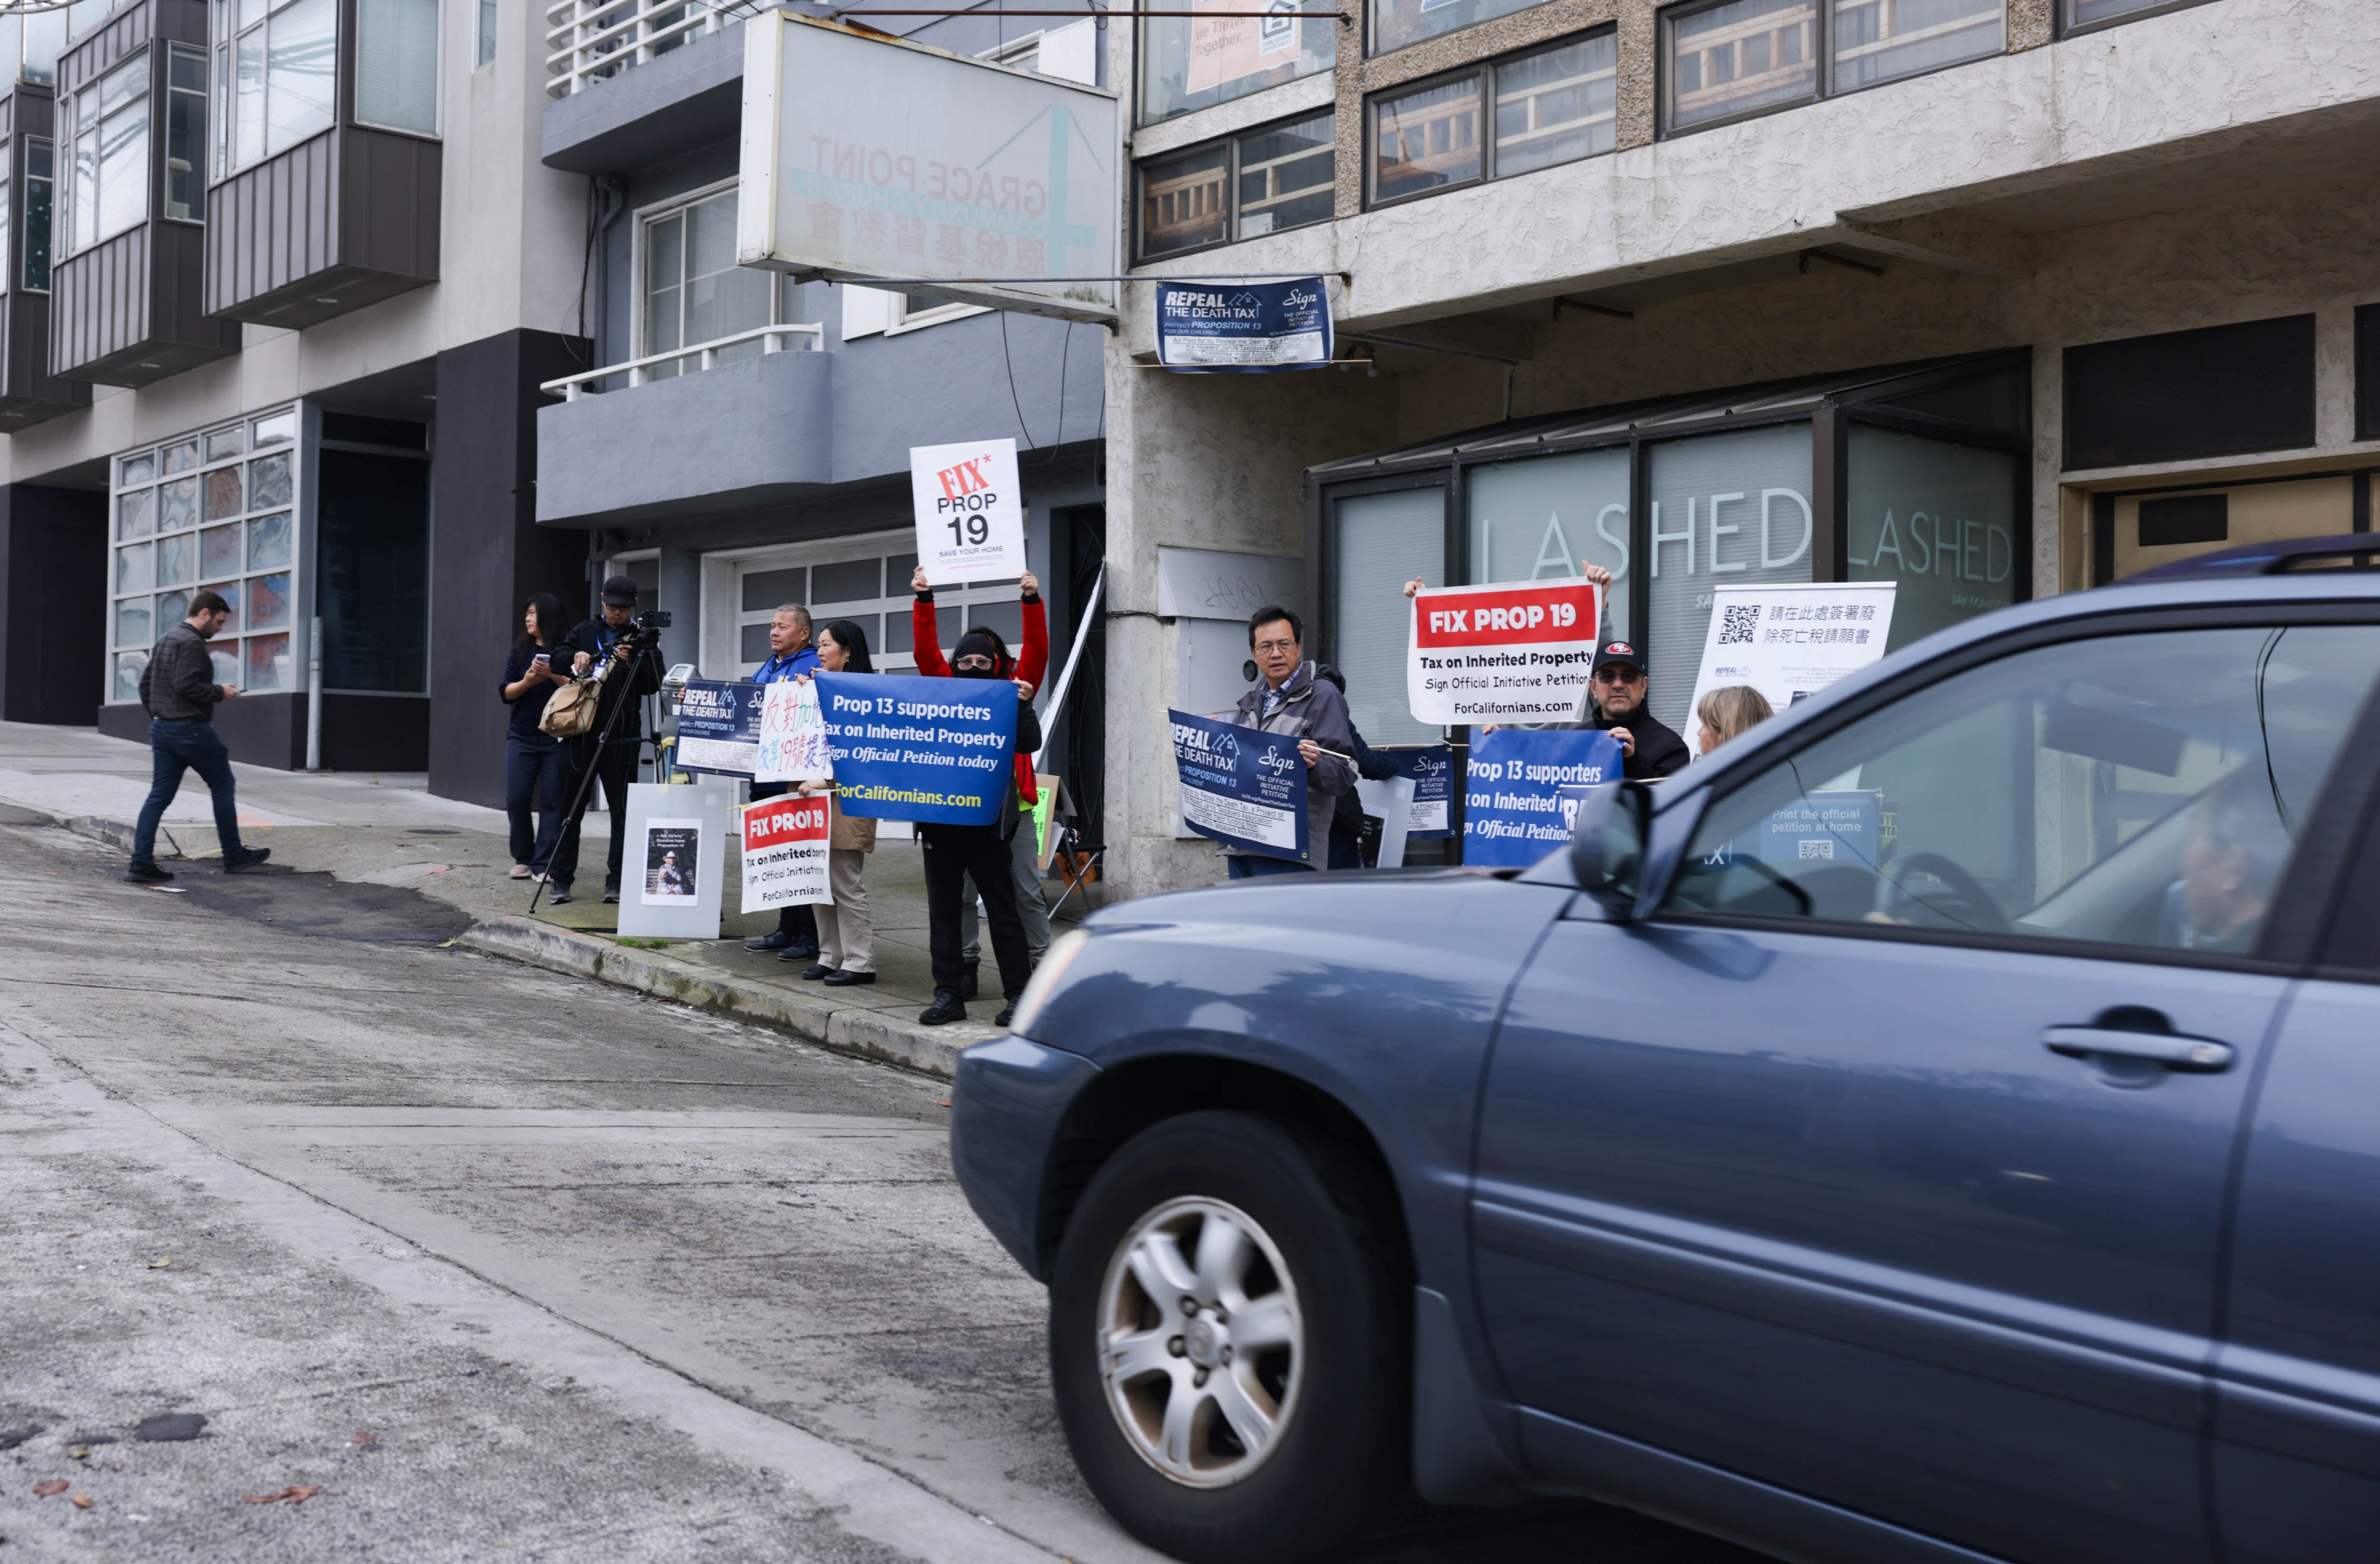 Protesters to Prop. 19 wave signs to a car passing by on Taraval Street.